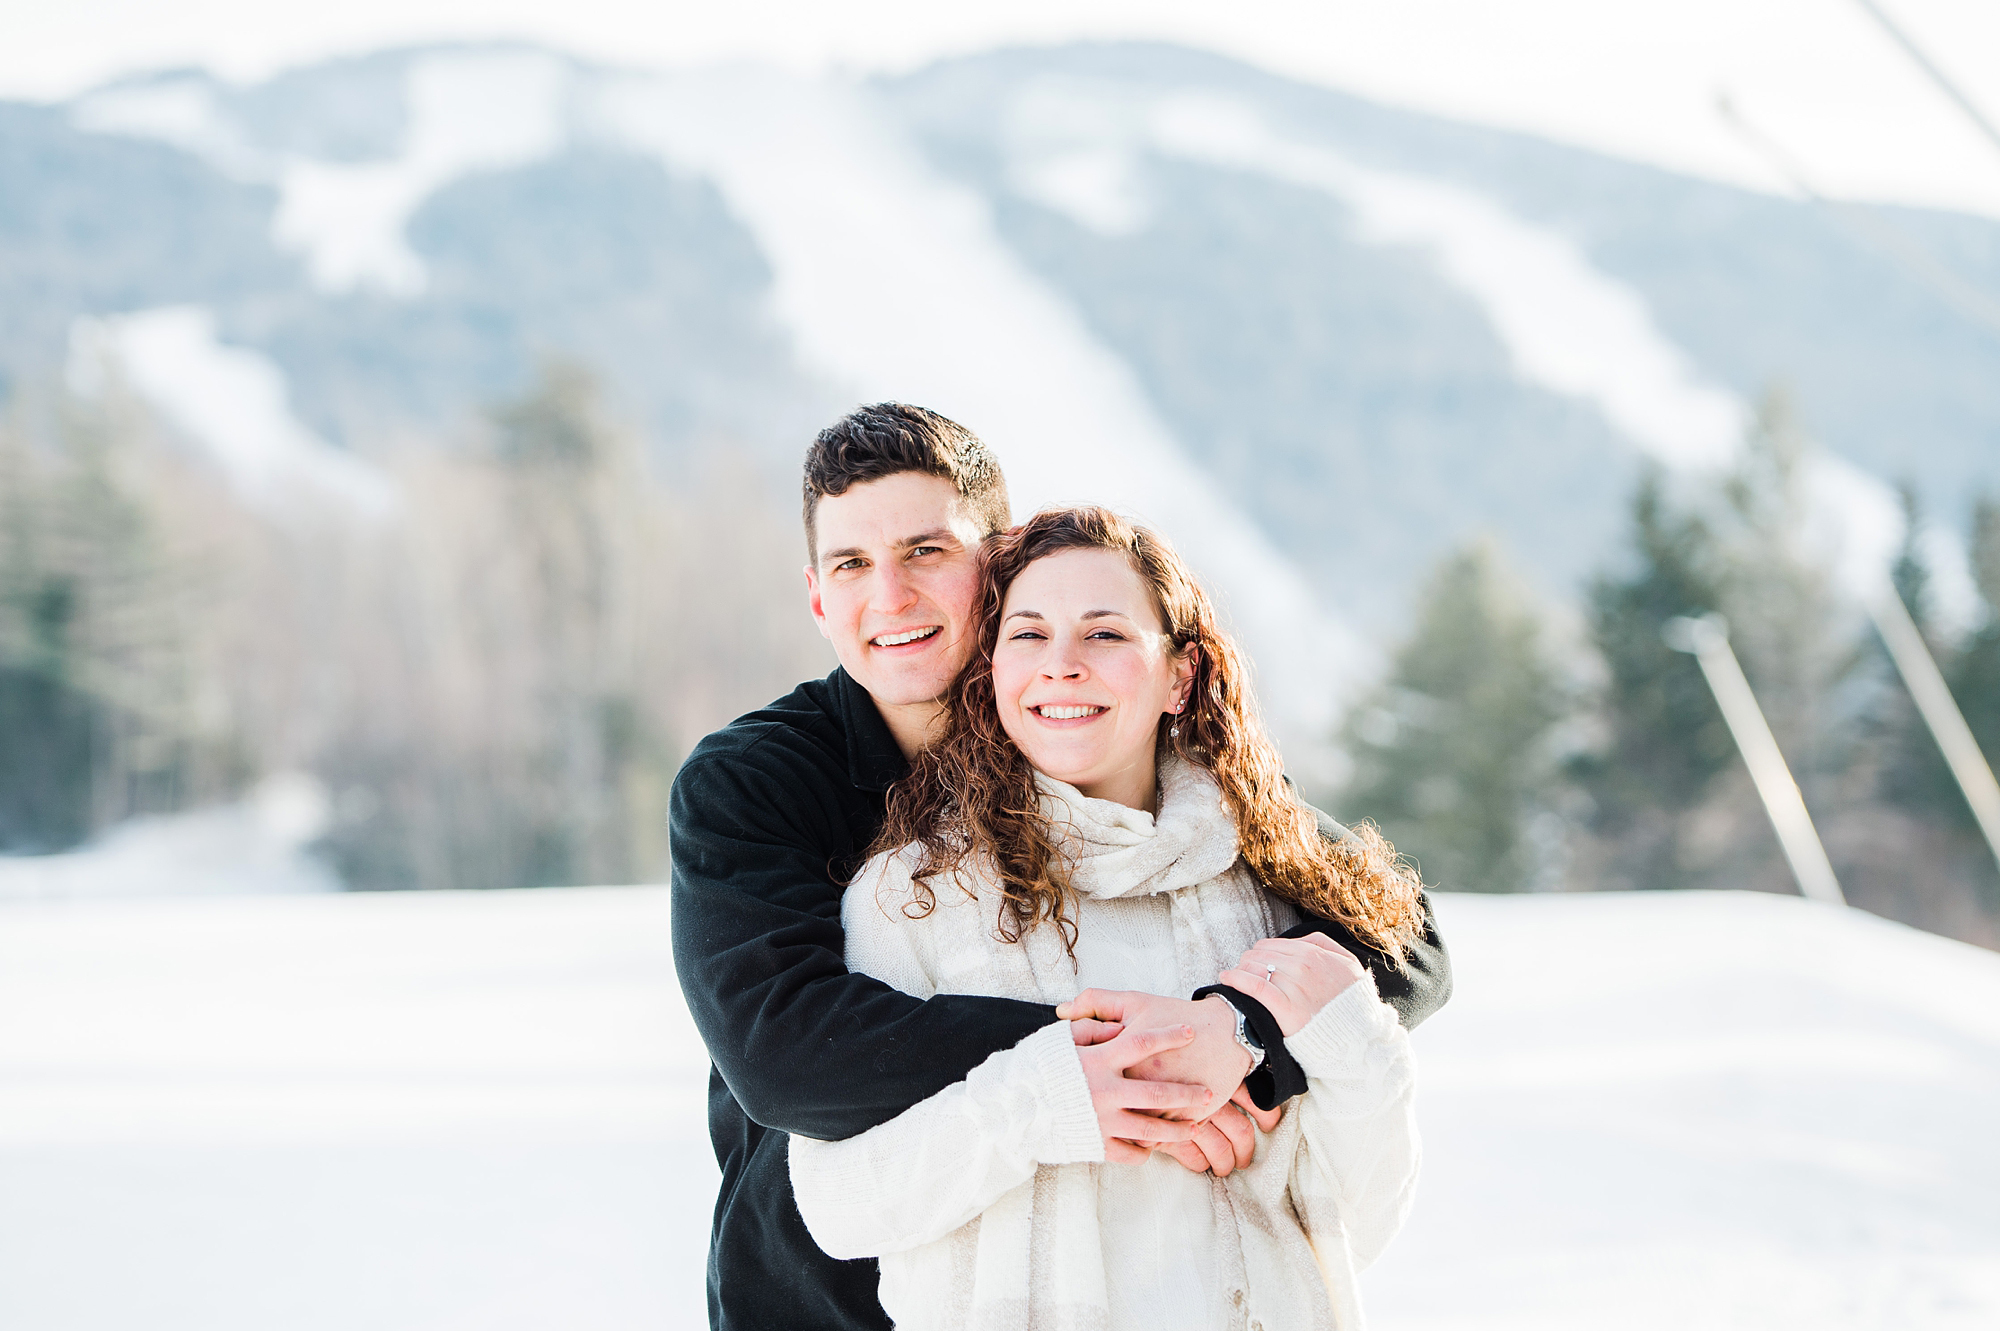 Killington Vermont Engagement Photography Session on the Mountain by a Vermont Wedding Photographer